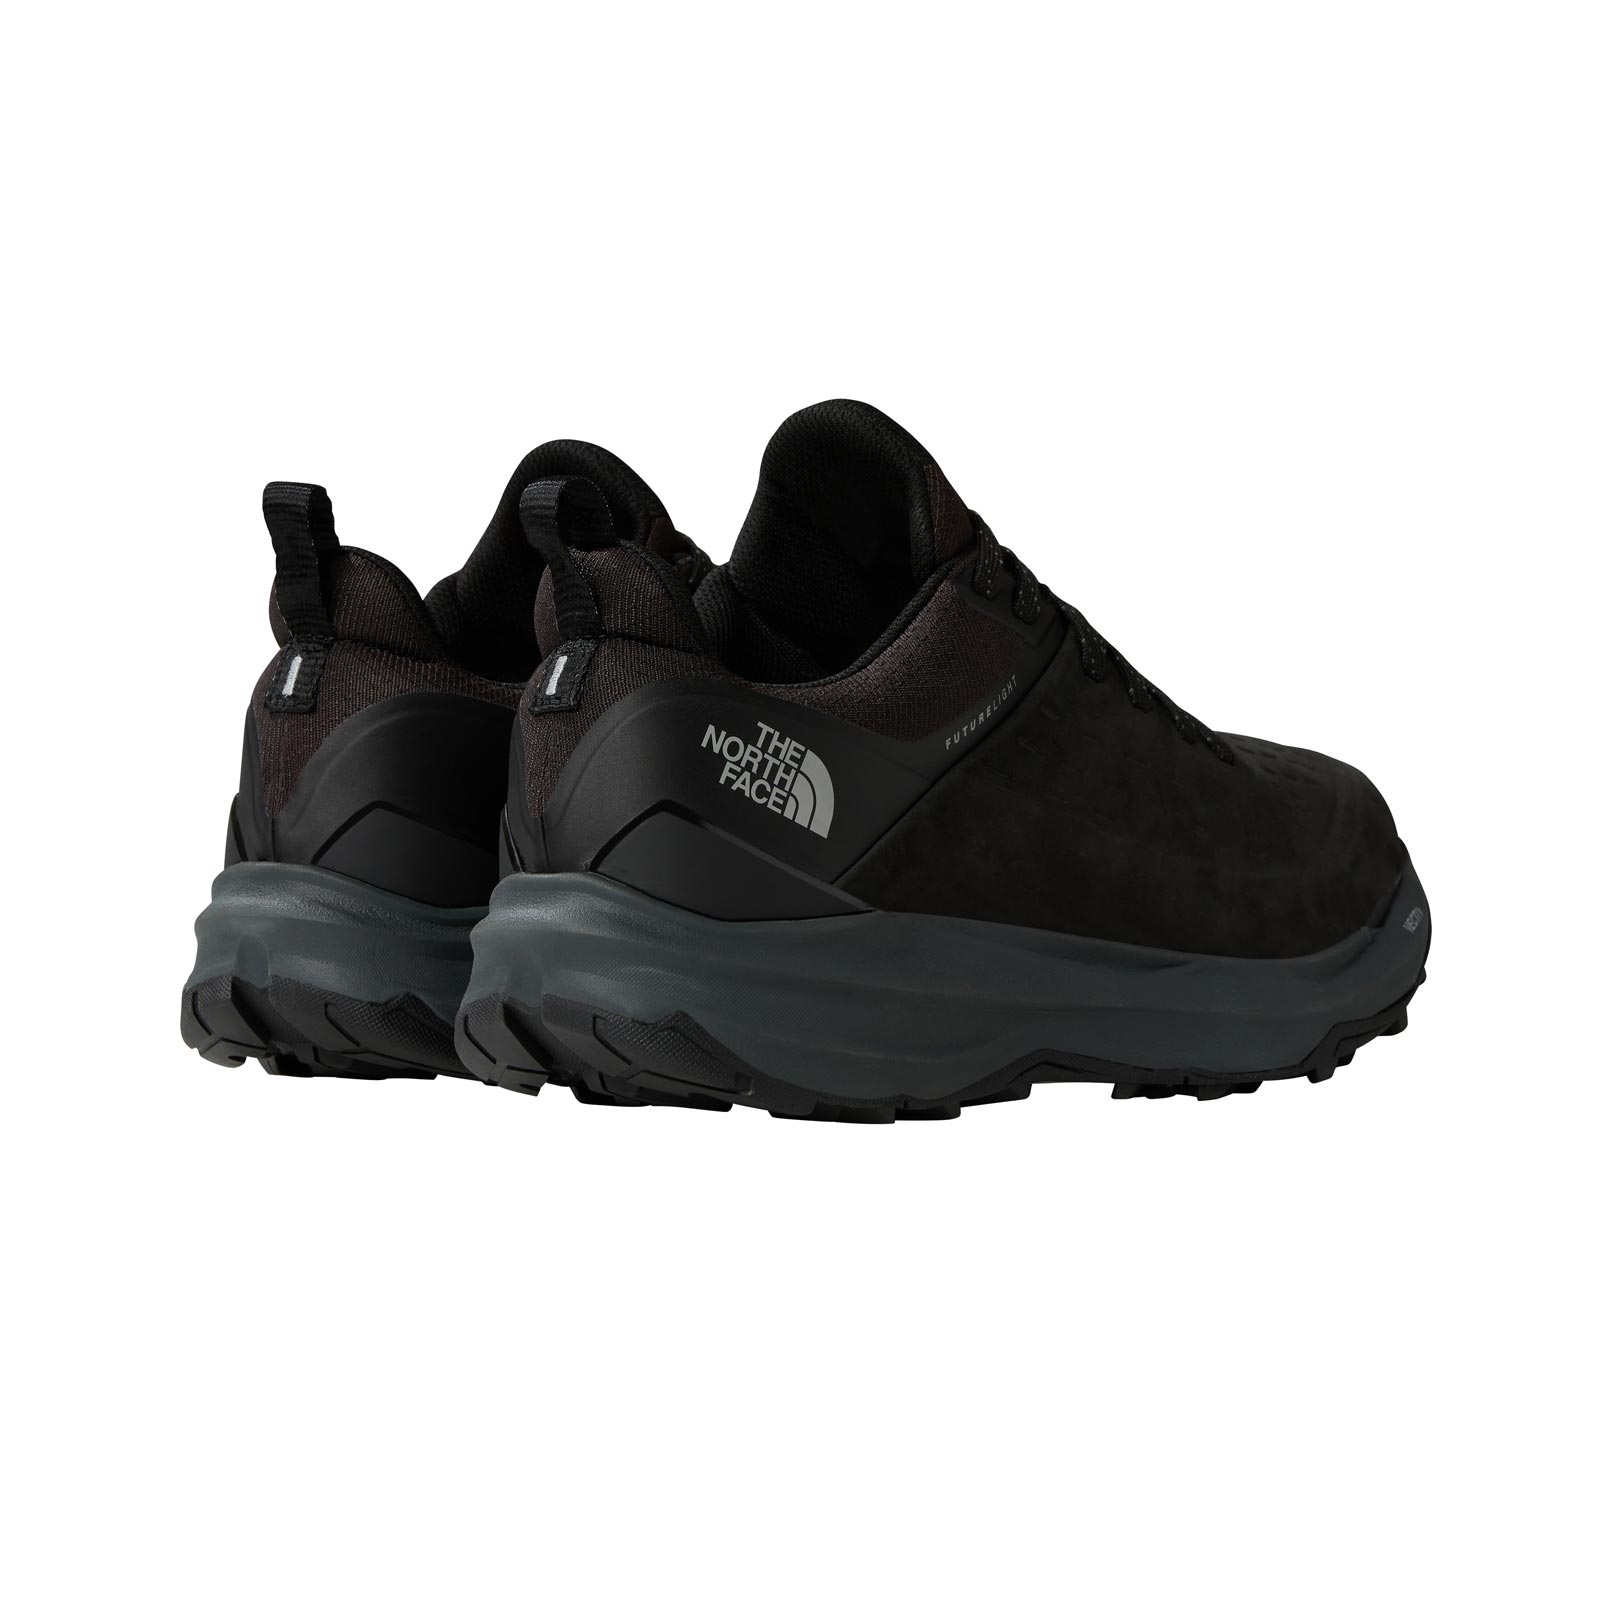 THE NORTH FACE VECTIV EXPLORIS 2 LEATHER MENS HIKING SHOES